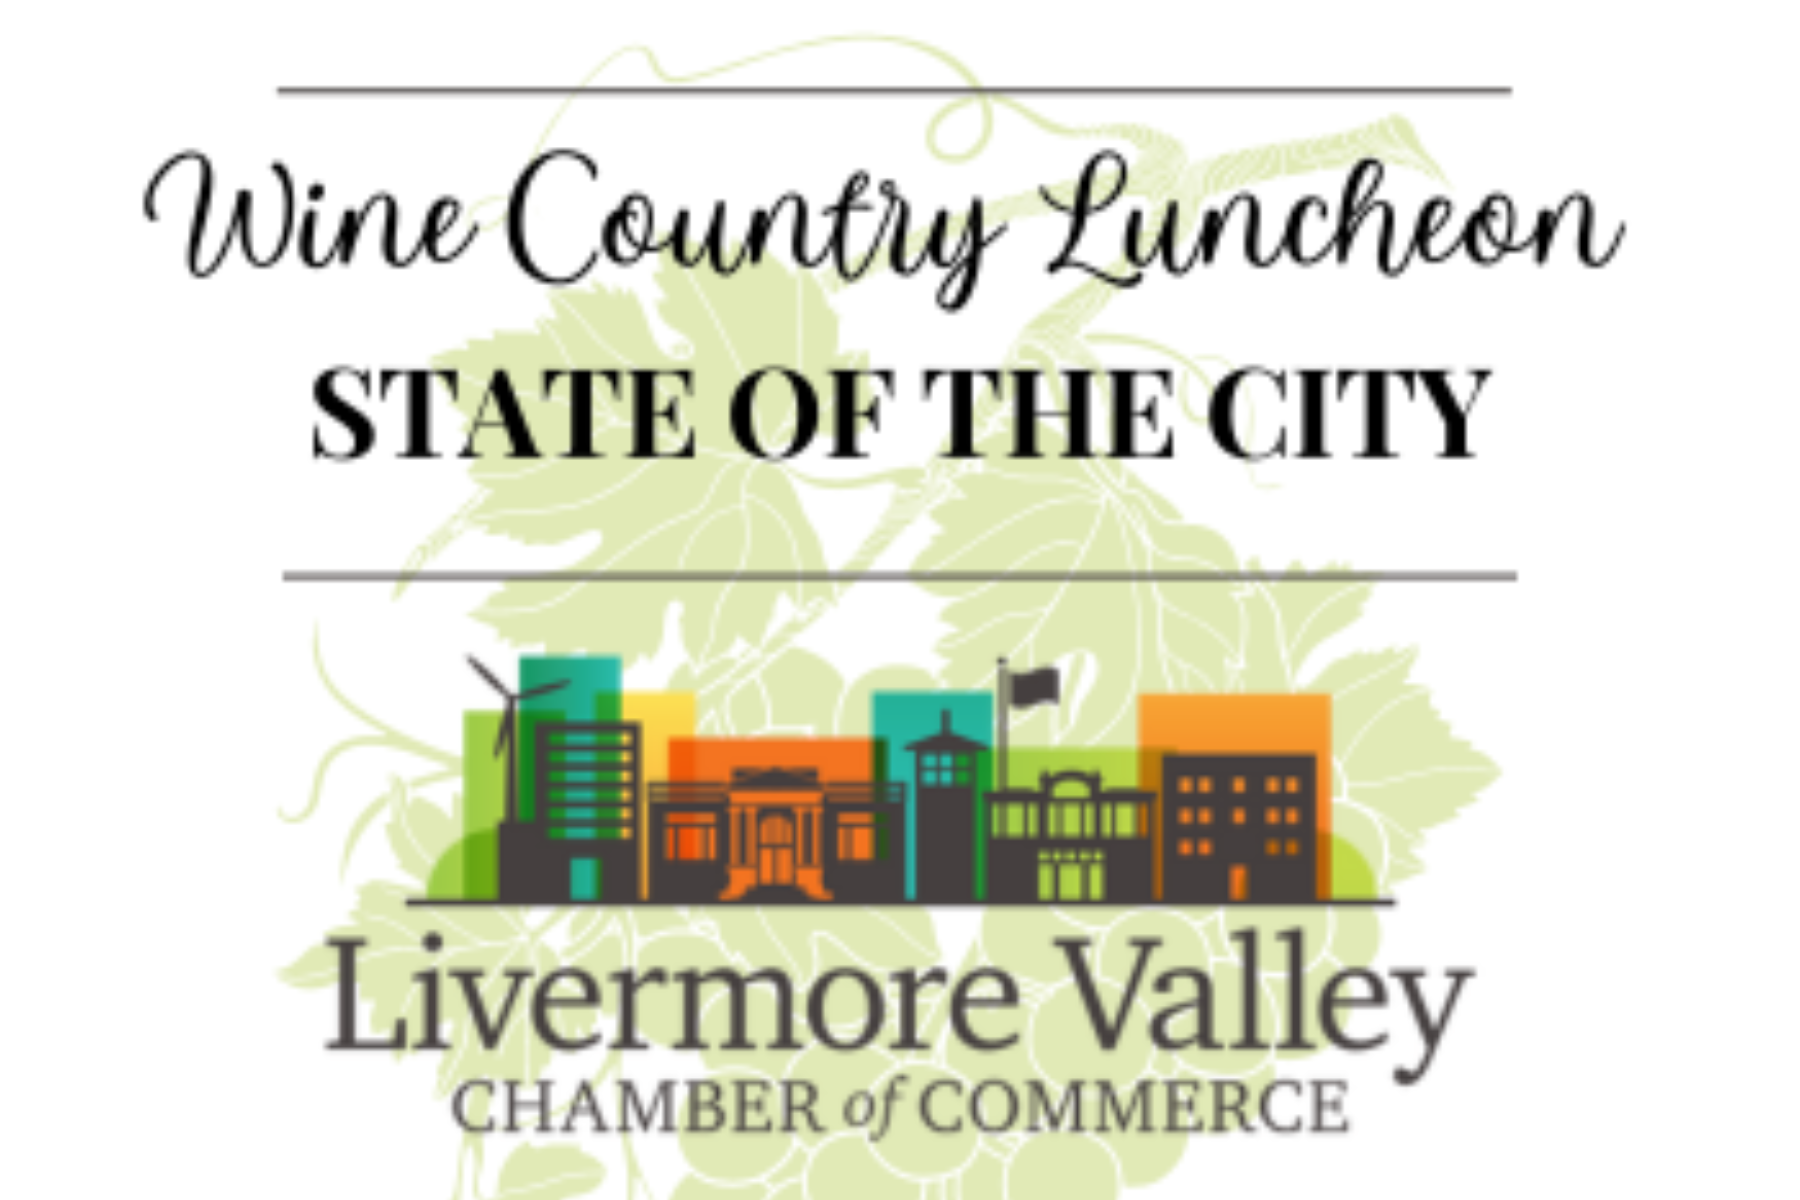 Livermore Valley Chamber of Commerce Kicks Off its Wine Country Event Season